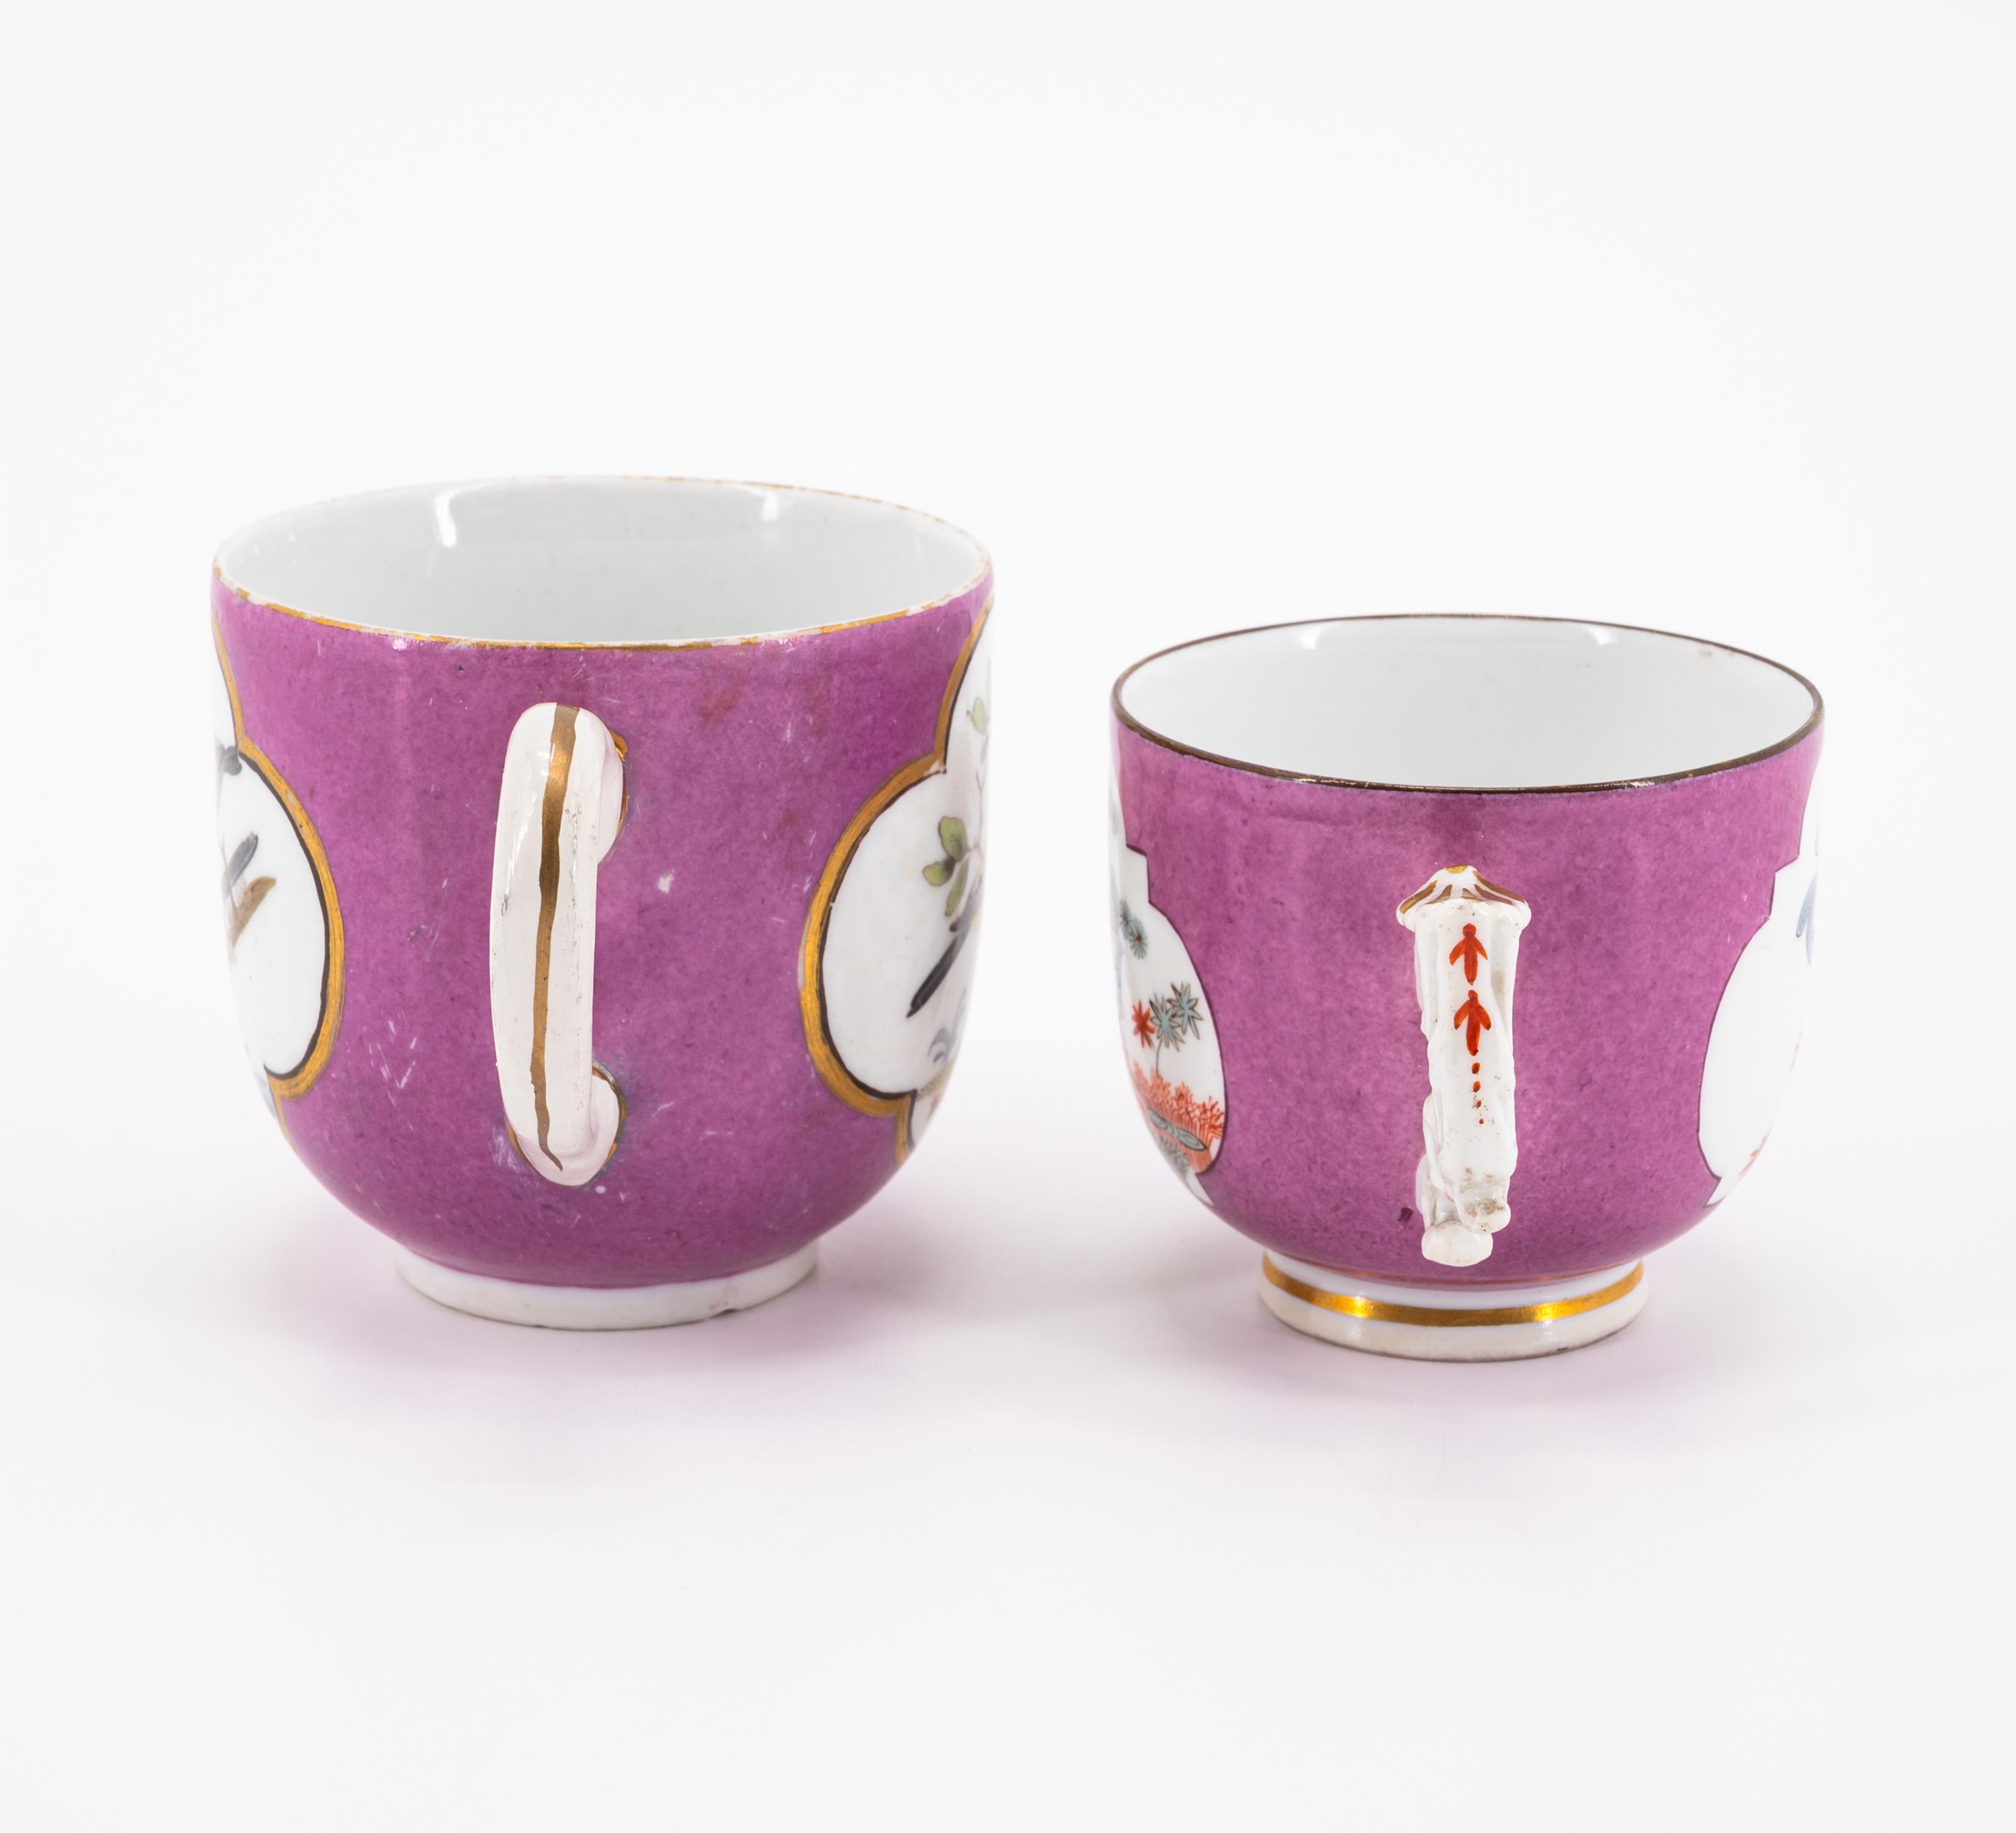 ONE PORCELAIN CUP AND SAUCER WITH QUAIL DECOR & TWO CUPS WITH PURPLE BACKGROUND AND BIRD DECOATIONS - Image 2 of 11